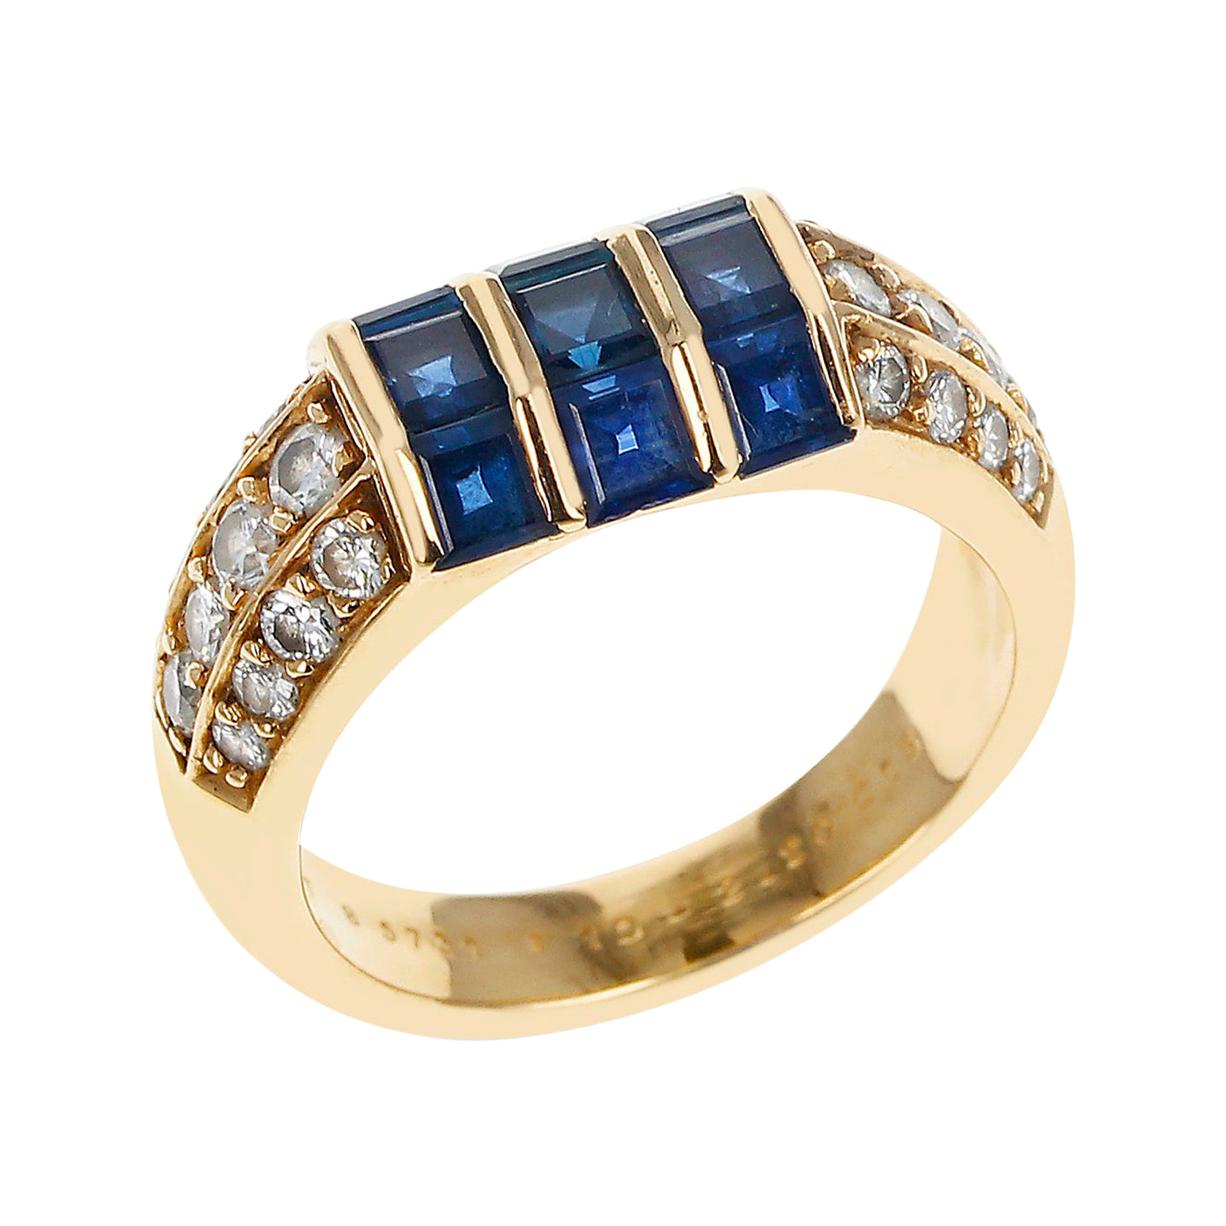 Van Cleef & Arpels Invisibly-Set Nine Sapphire and Diamonds Ring, 18k Yellow